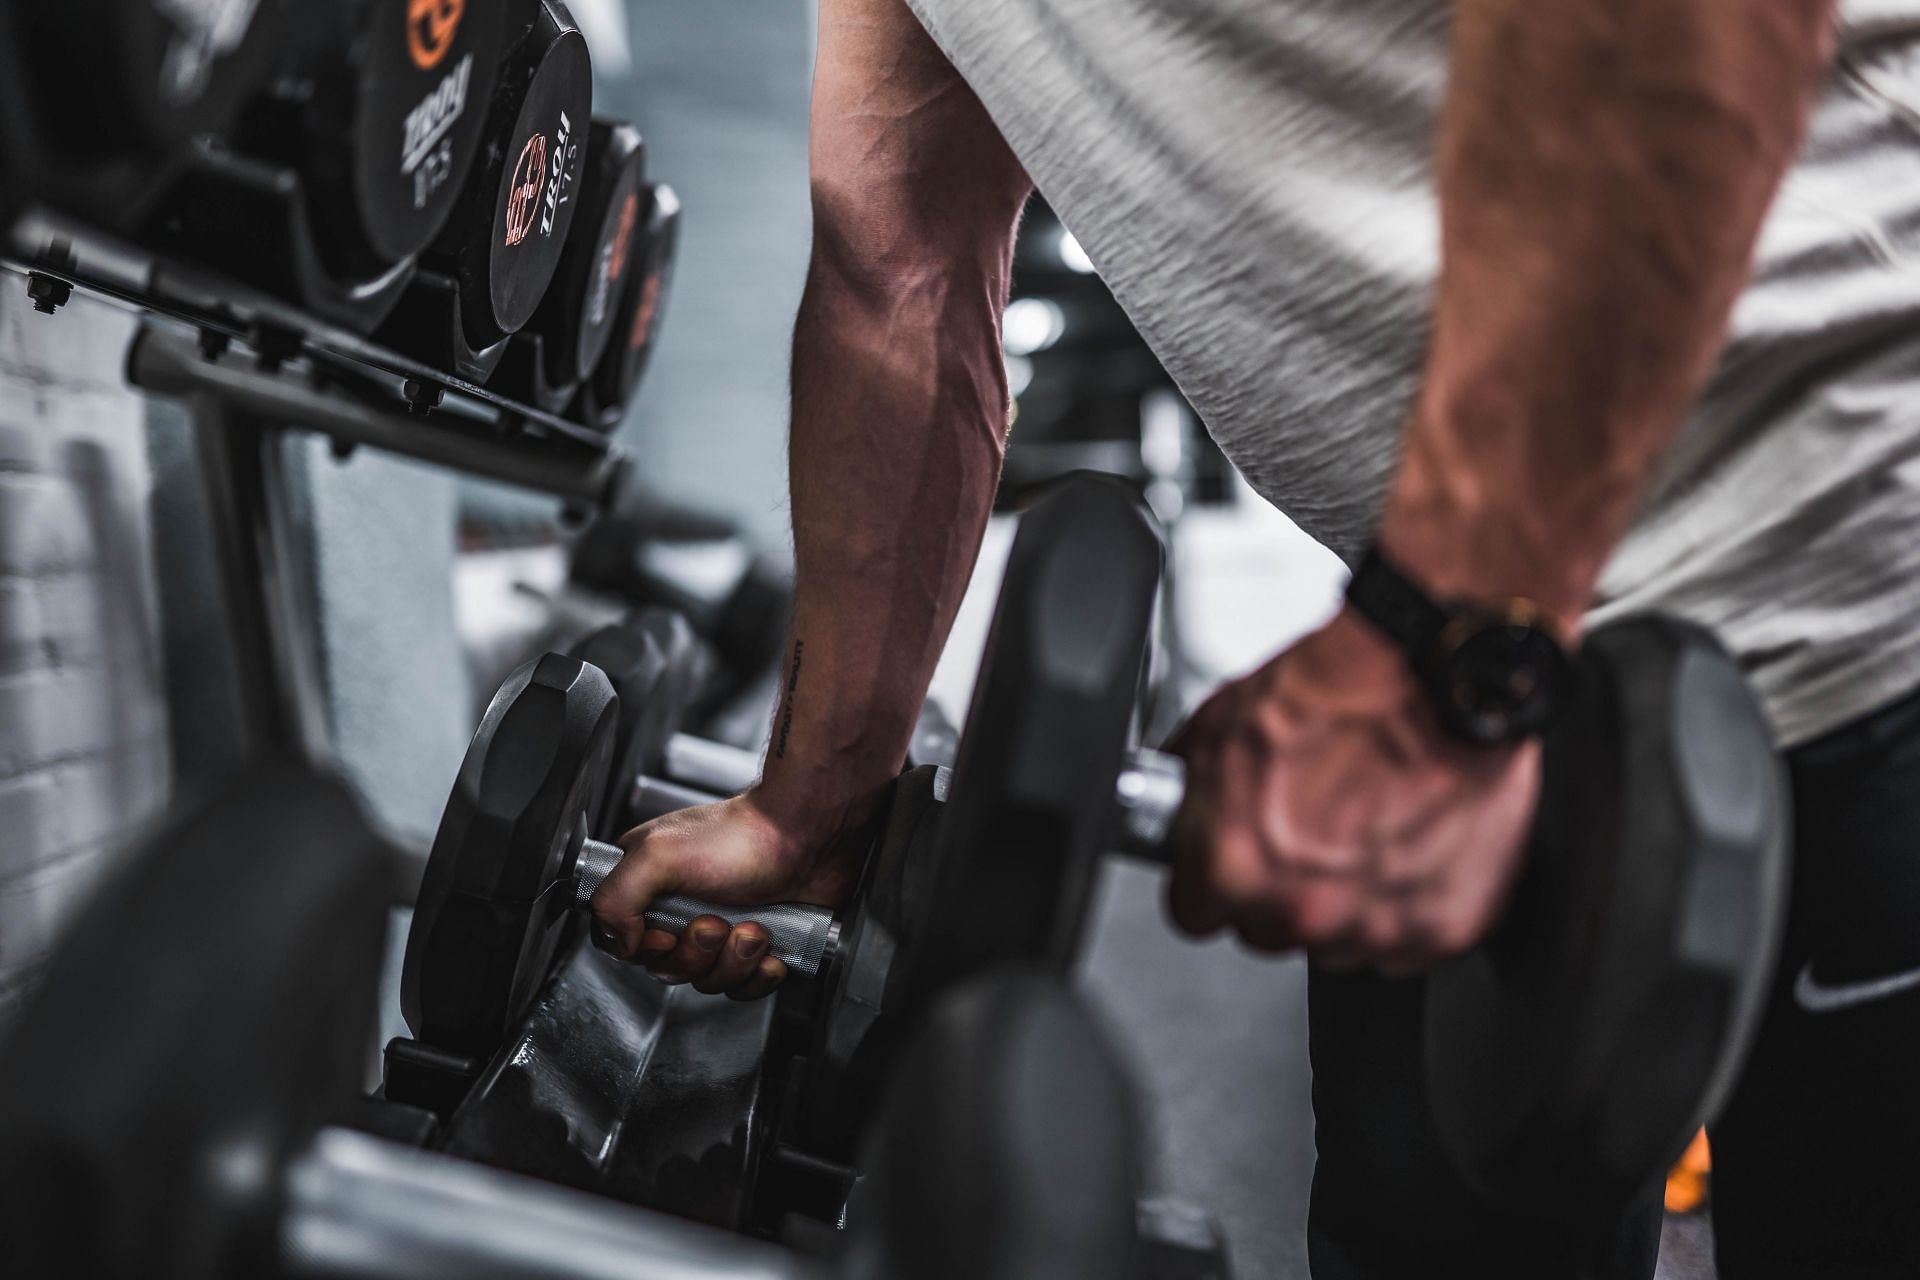 The 5-day dumbbell workout split is a highly effective way to build muscle and increase strength. (Photo: Unsplash/Anastase Maragos)